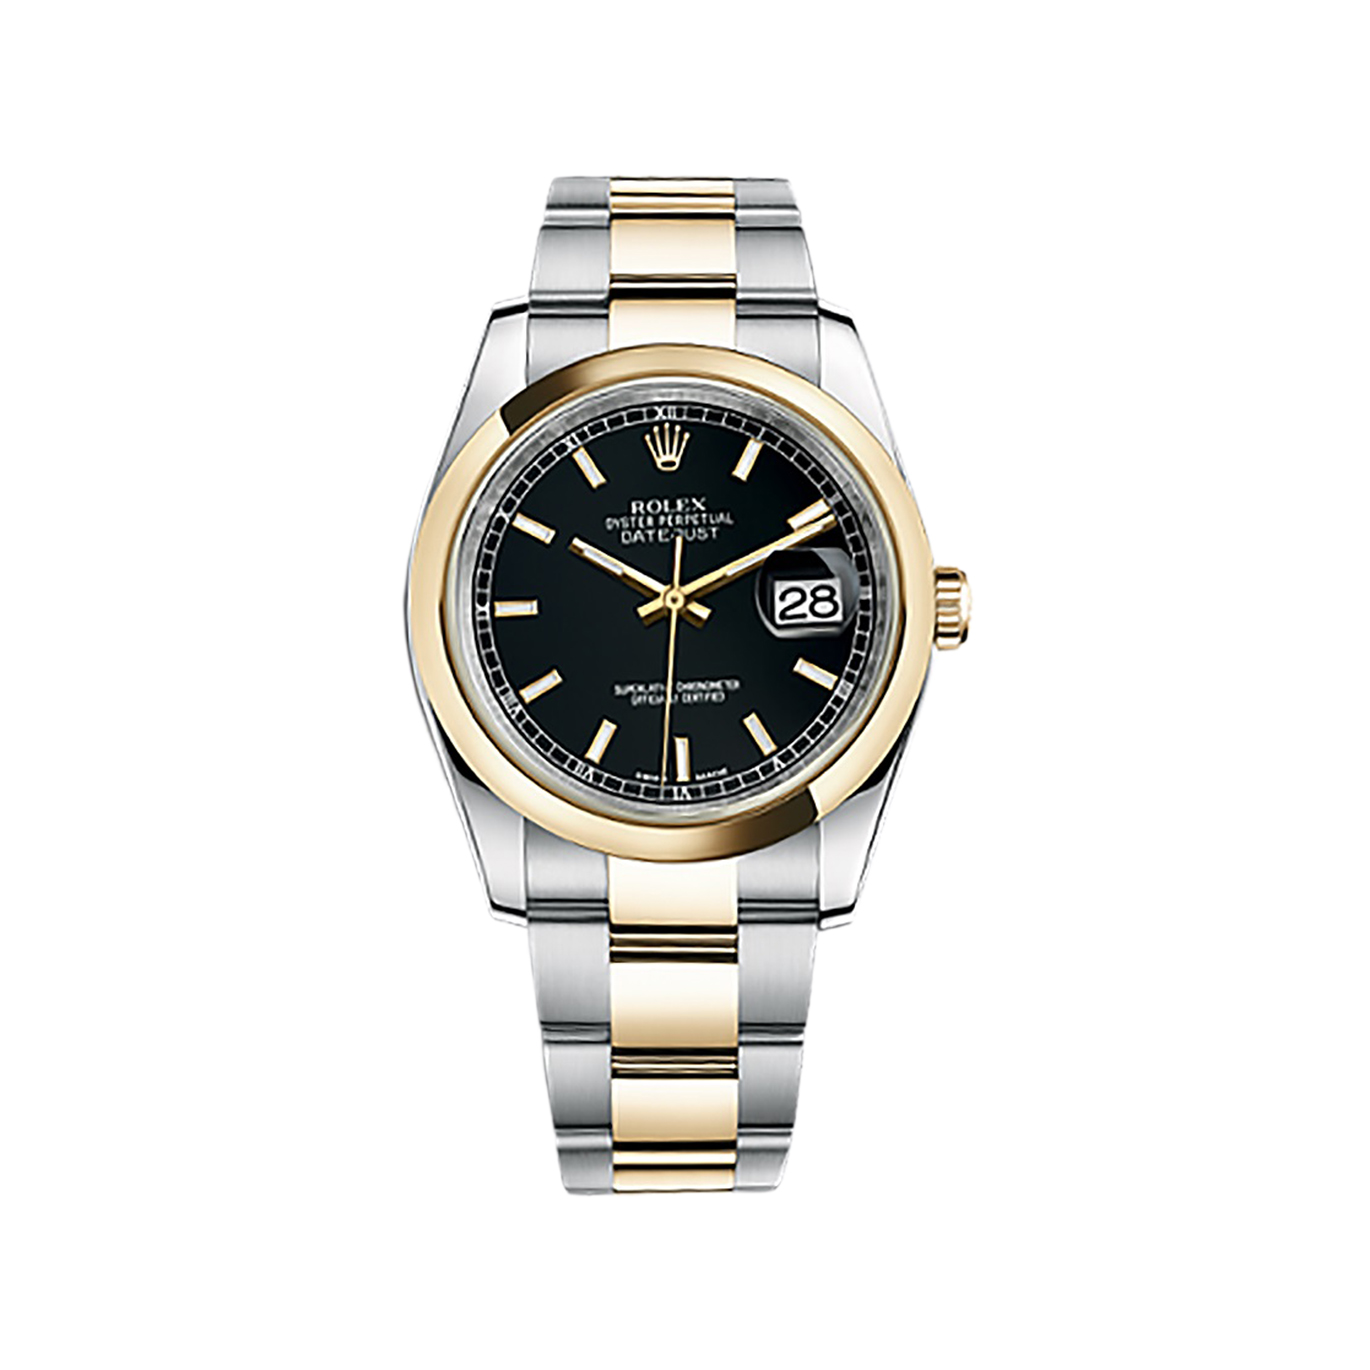 Datejust 36 116203 Gold & Stainless Steel Watch (Black) - Click Image to Close